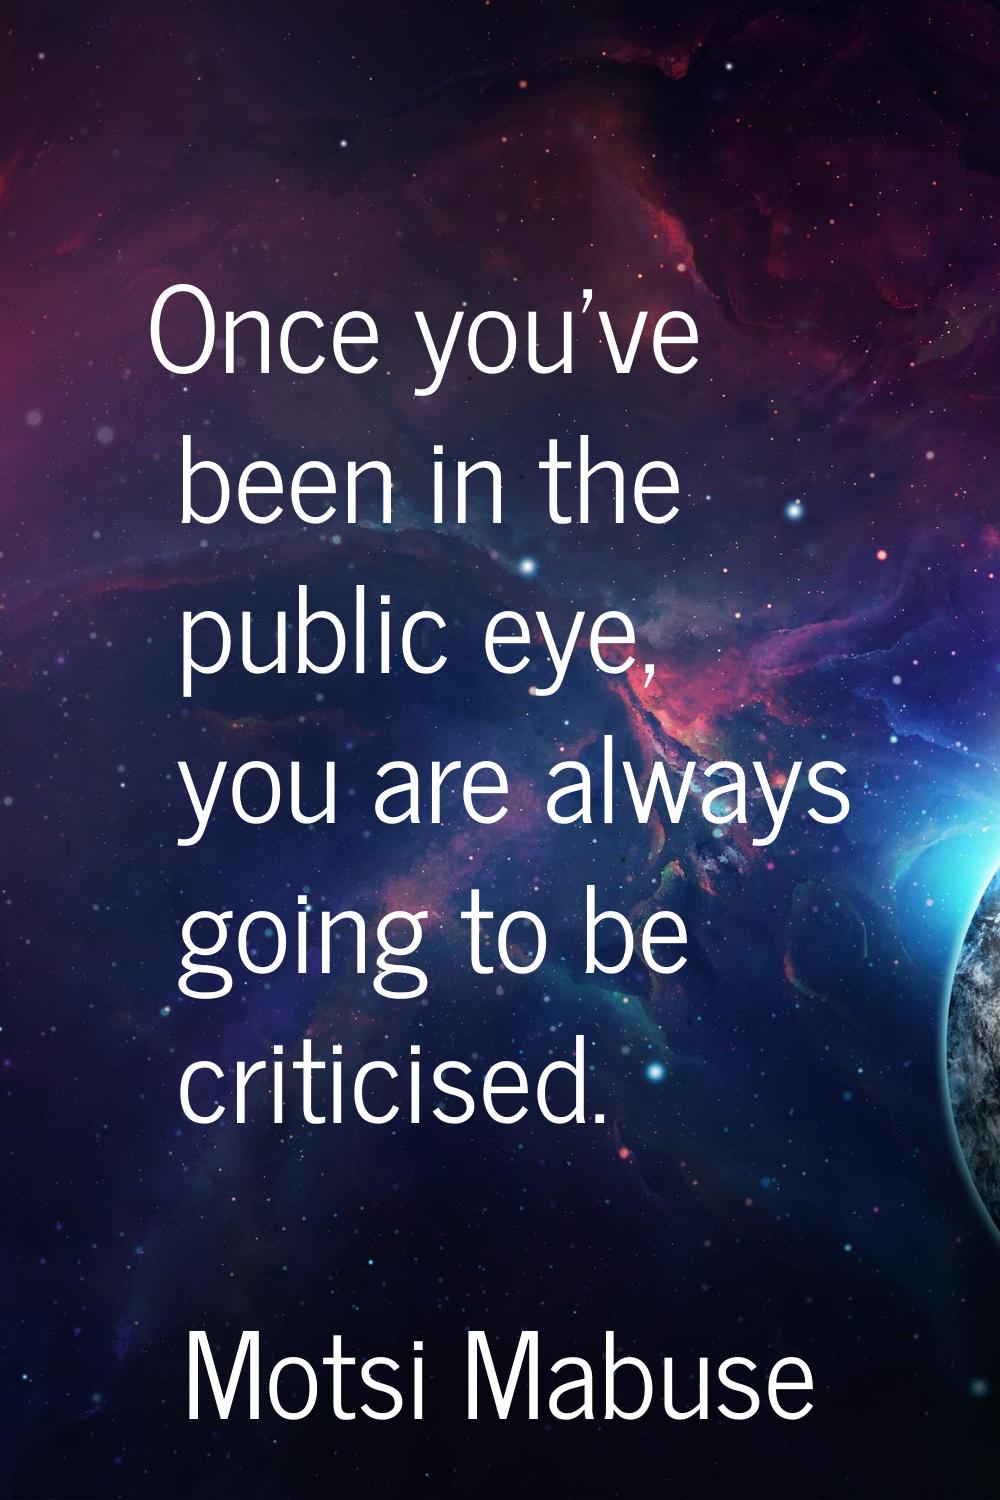 Once you've been in the public eye, you are always going to be criticised.